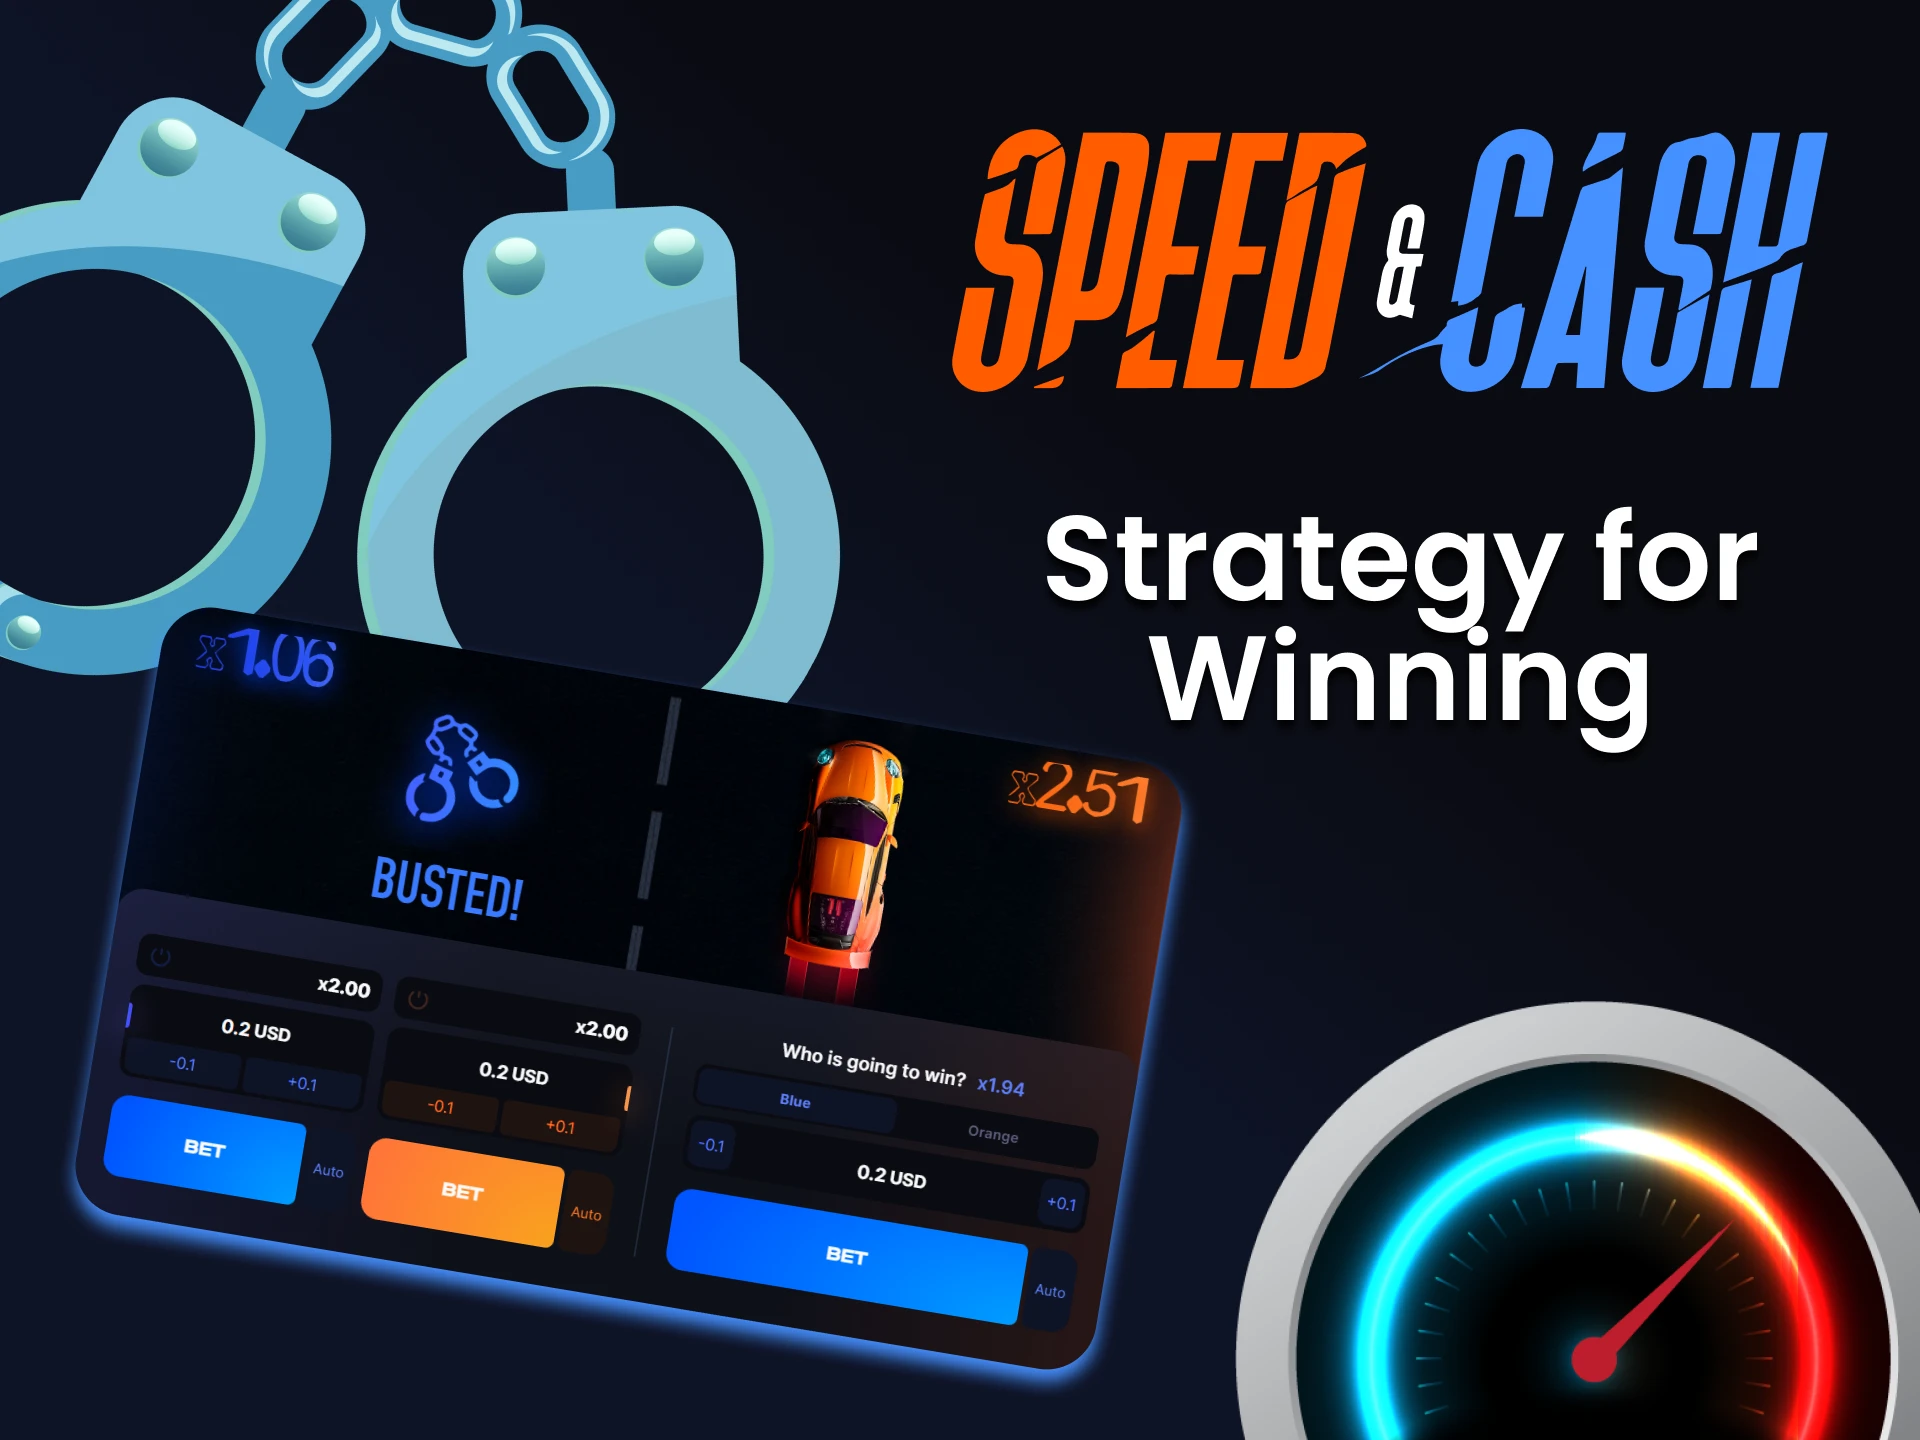 Choose the tactics that suit you in the game Speed&Cash.